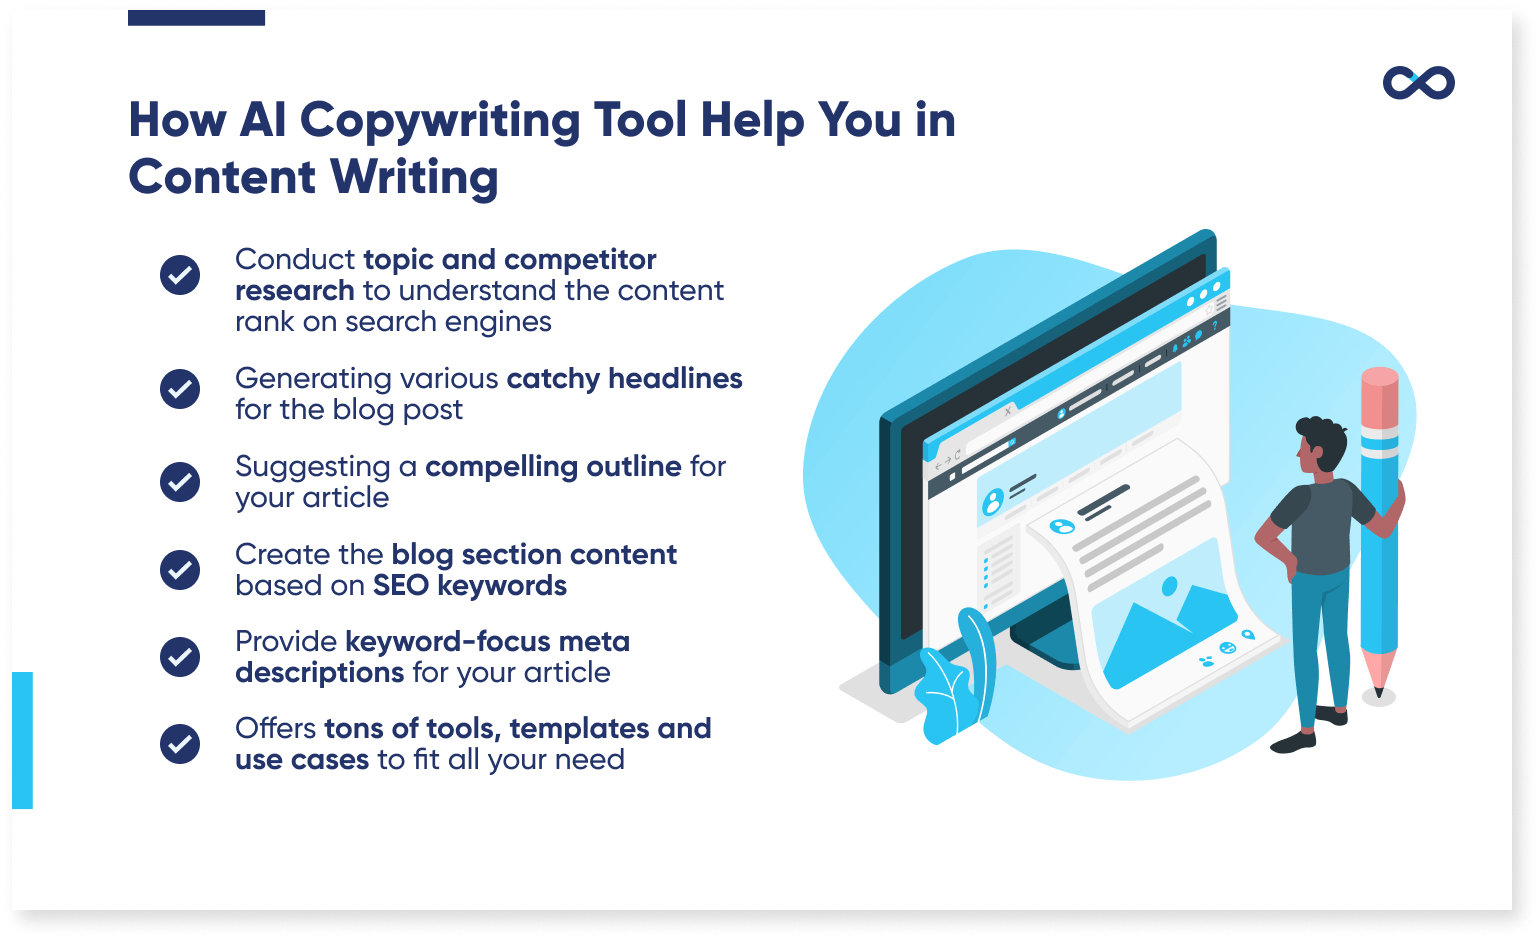 infographic on how AI copywriting tool help in content writing